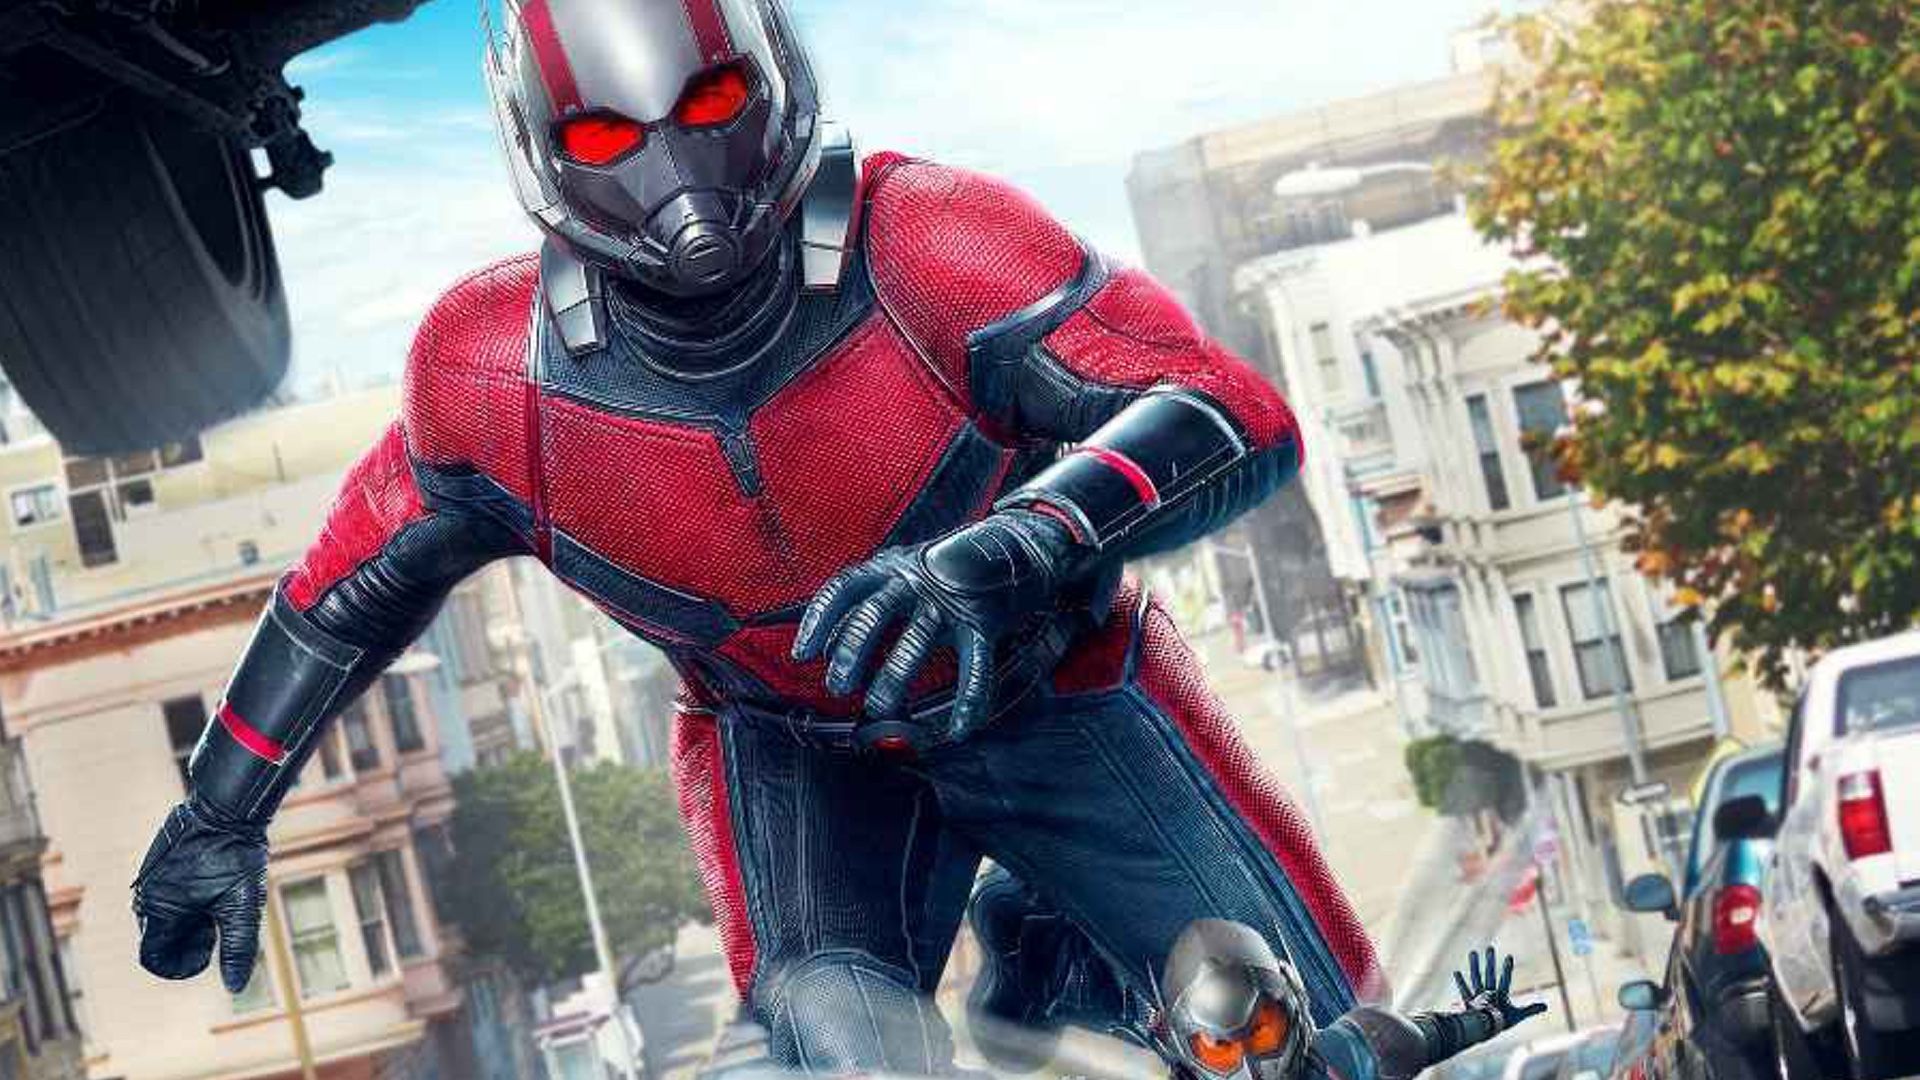 Scott Lang Brags About His Avengers Status In New TV Spot For ANT MAN AND THE WASP! Plus We Have 3 New Posters